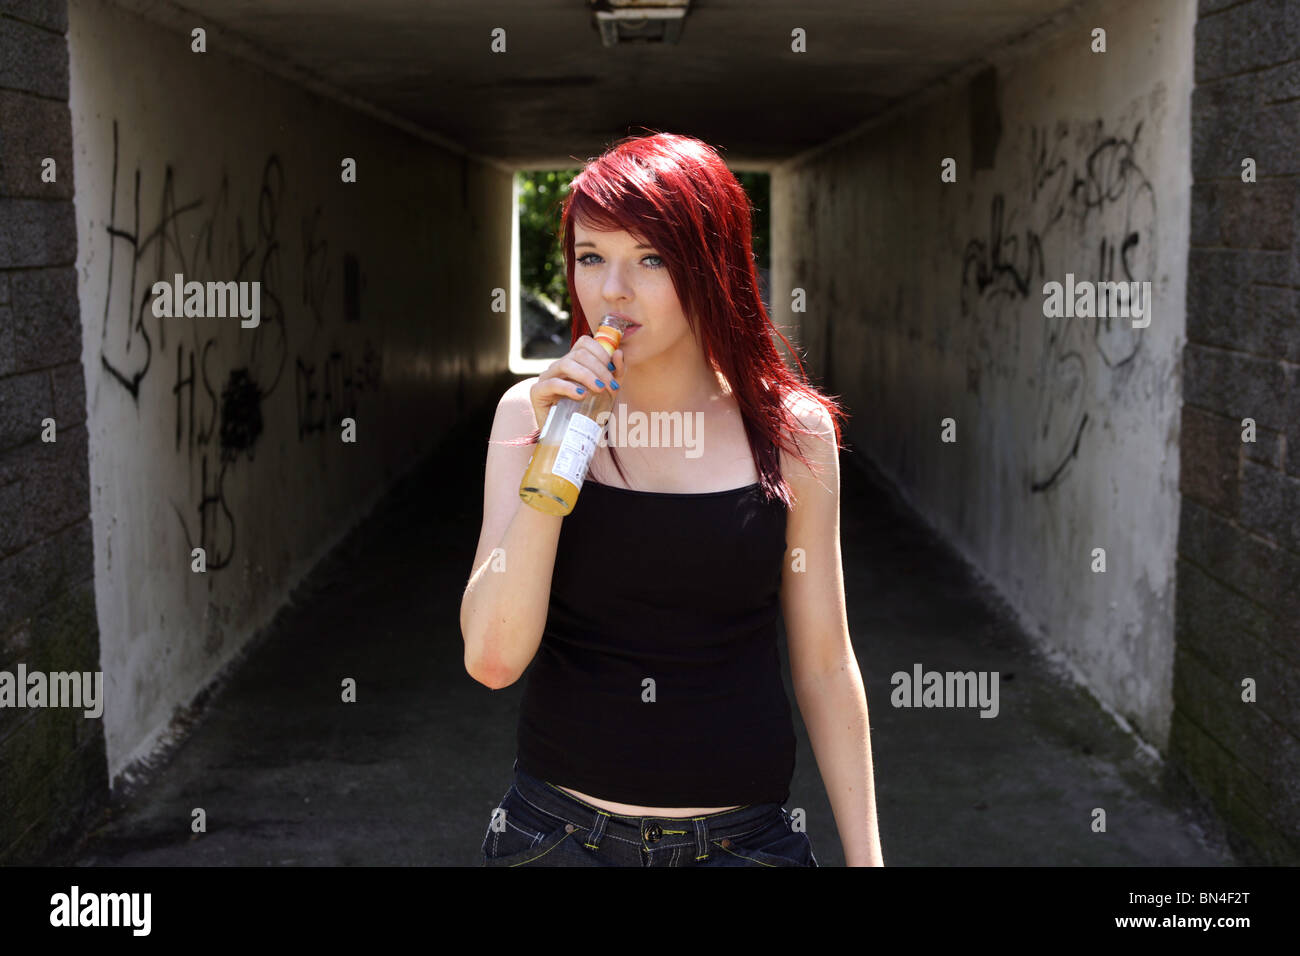 Teenage girl drinking a bottle of alcohol outside near a underpass. Stock Photo